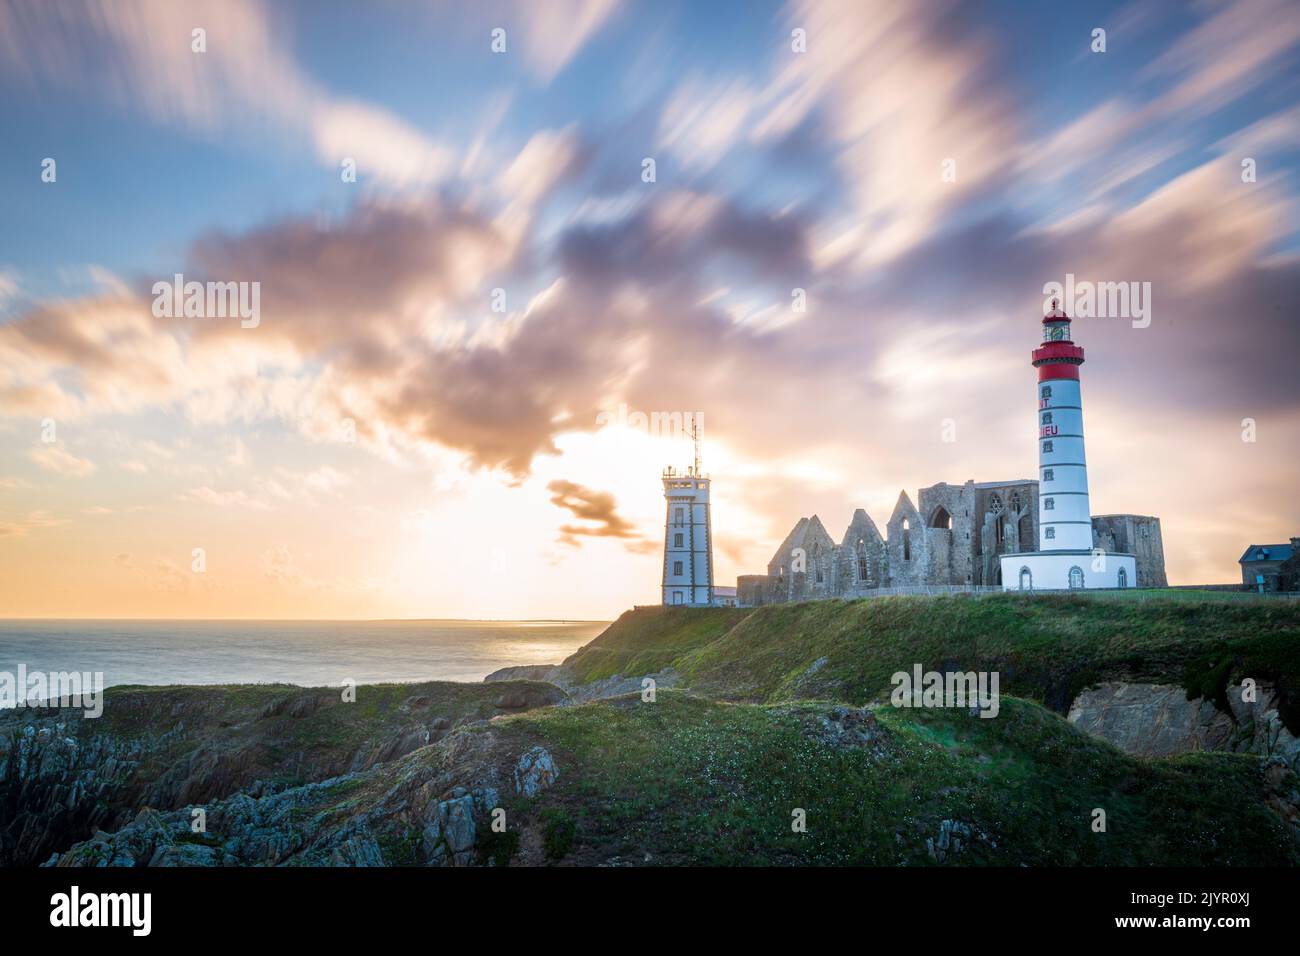 Saint-Mathieu lighthouse at sunset in summer, Finistere, France Stock Photo